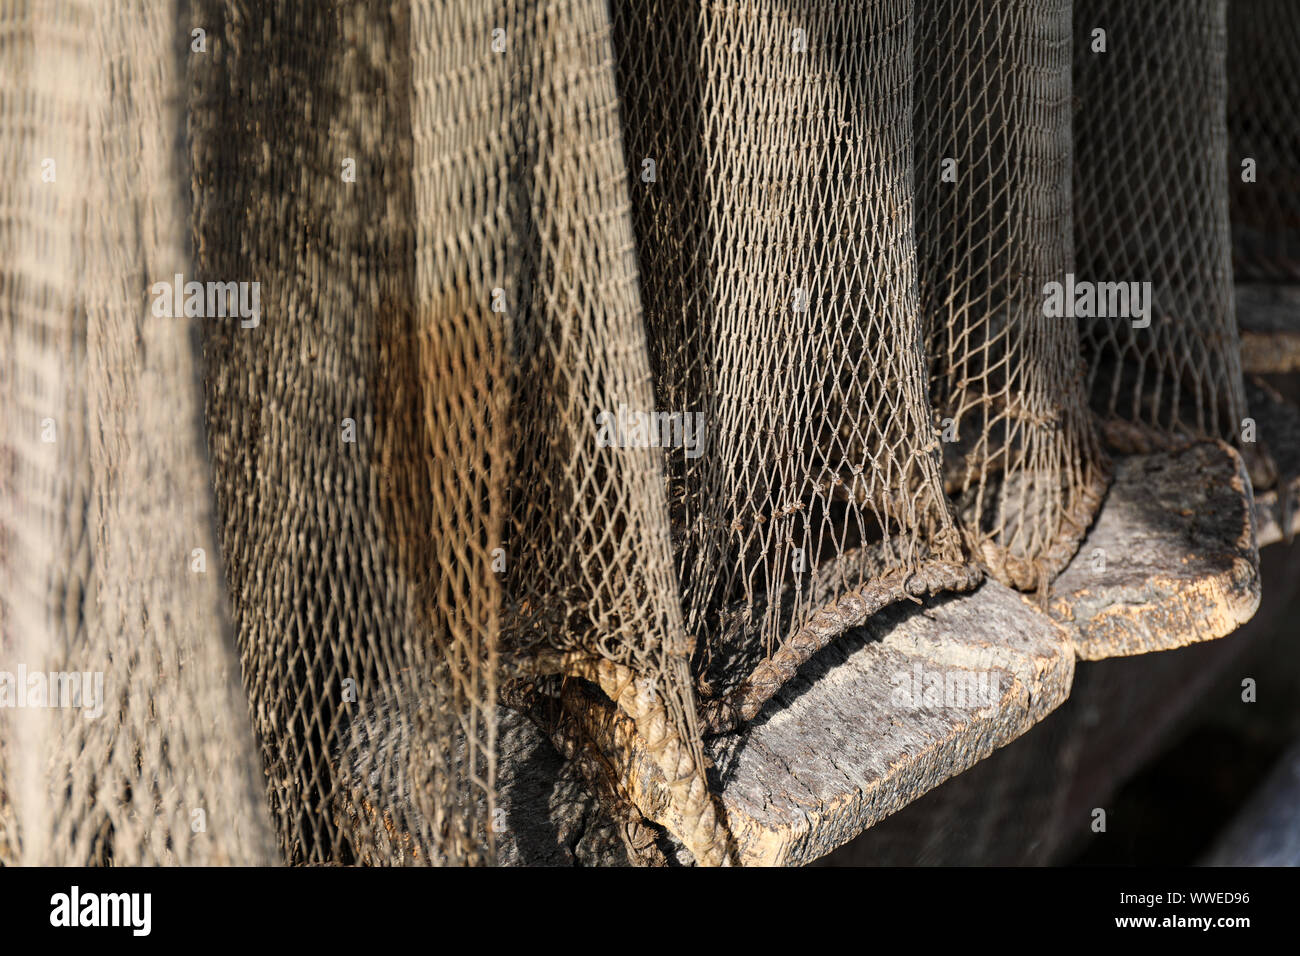 Black Red Floats Attached Fishing Net Stock Photo 665530996